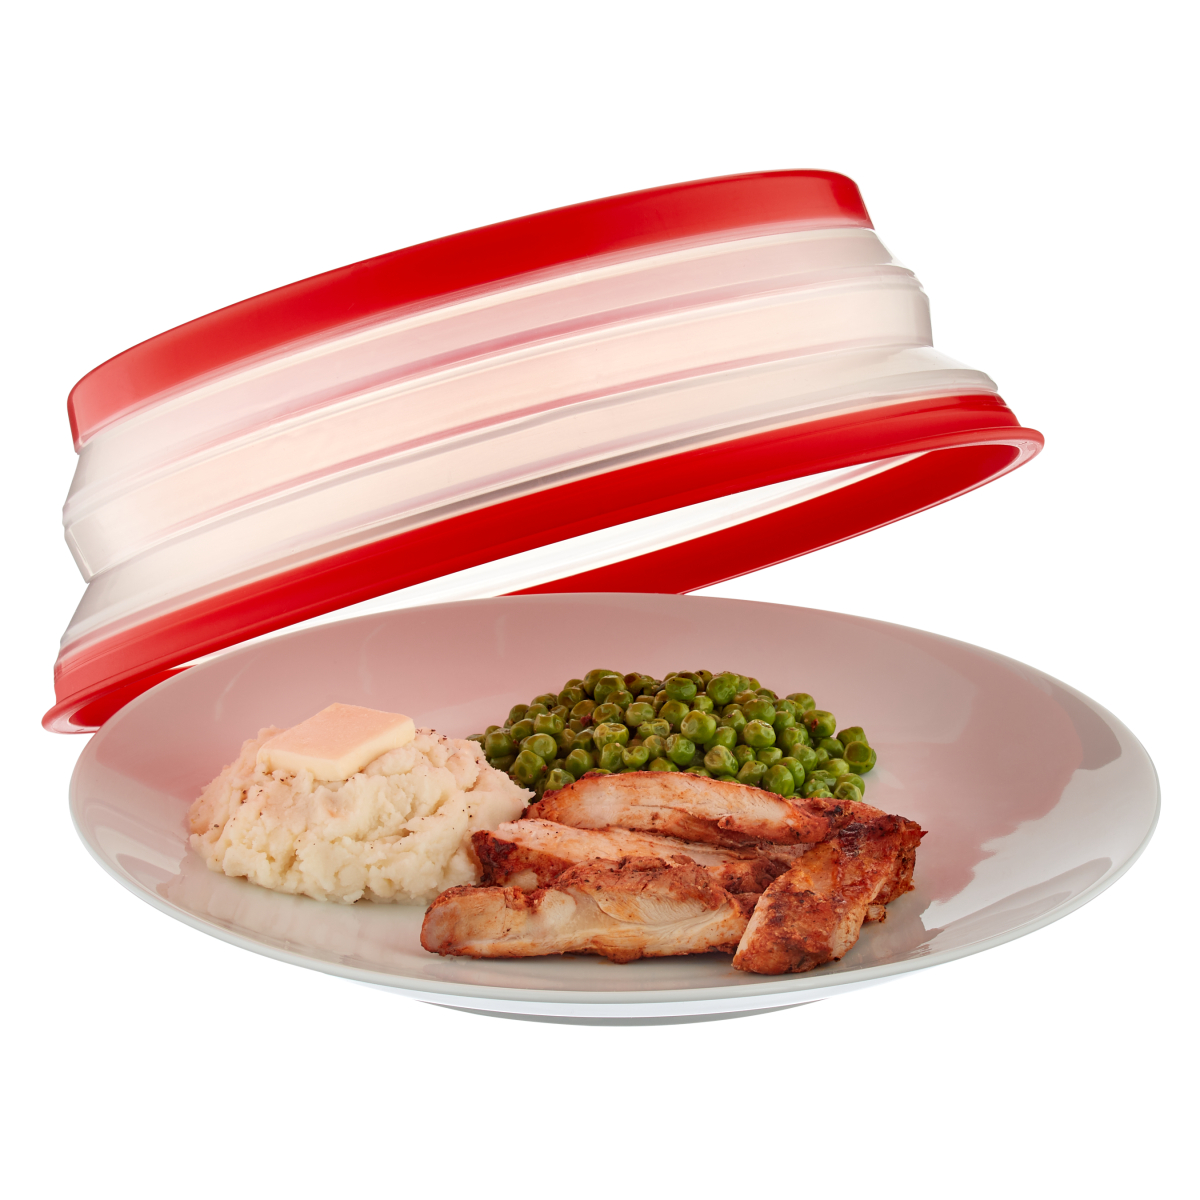 https://www.containerstore.com/catalogimages/469592/10053906_collapsible_food_cover_v3.jpg